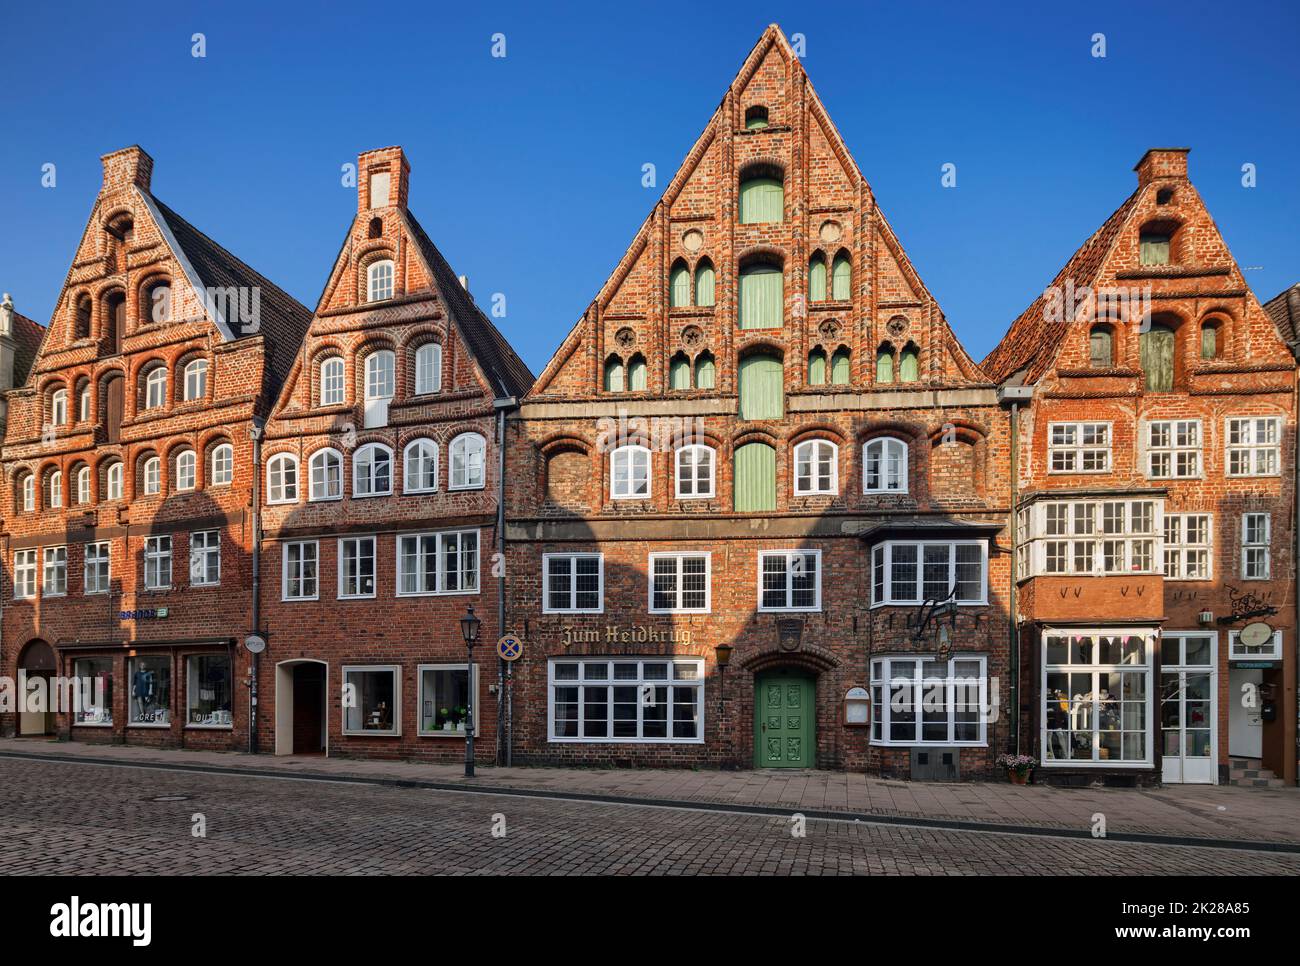 Germany, hanseatic Town - historic buildings in Lüneburg, Lower Saxony, brick gothic medieval architecture Stock Photo